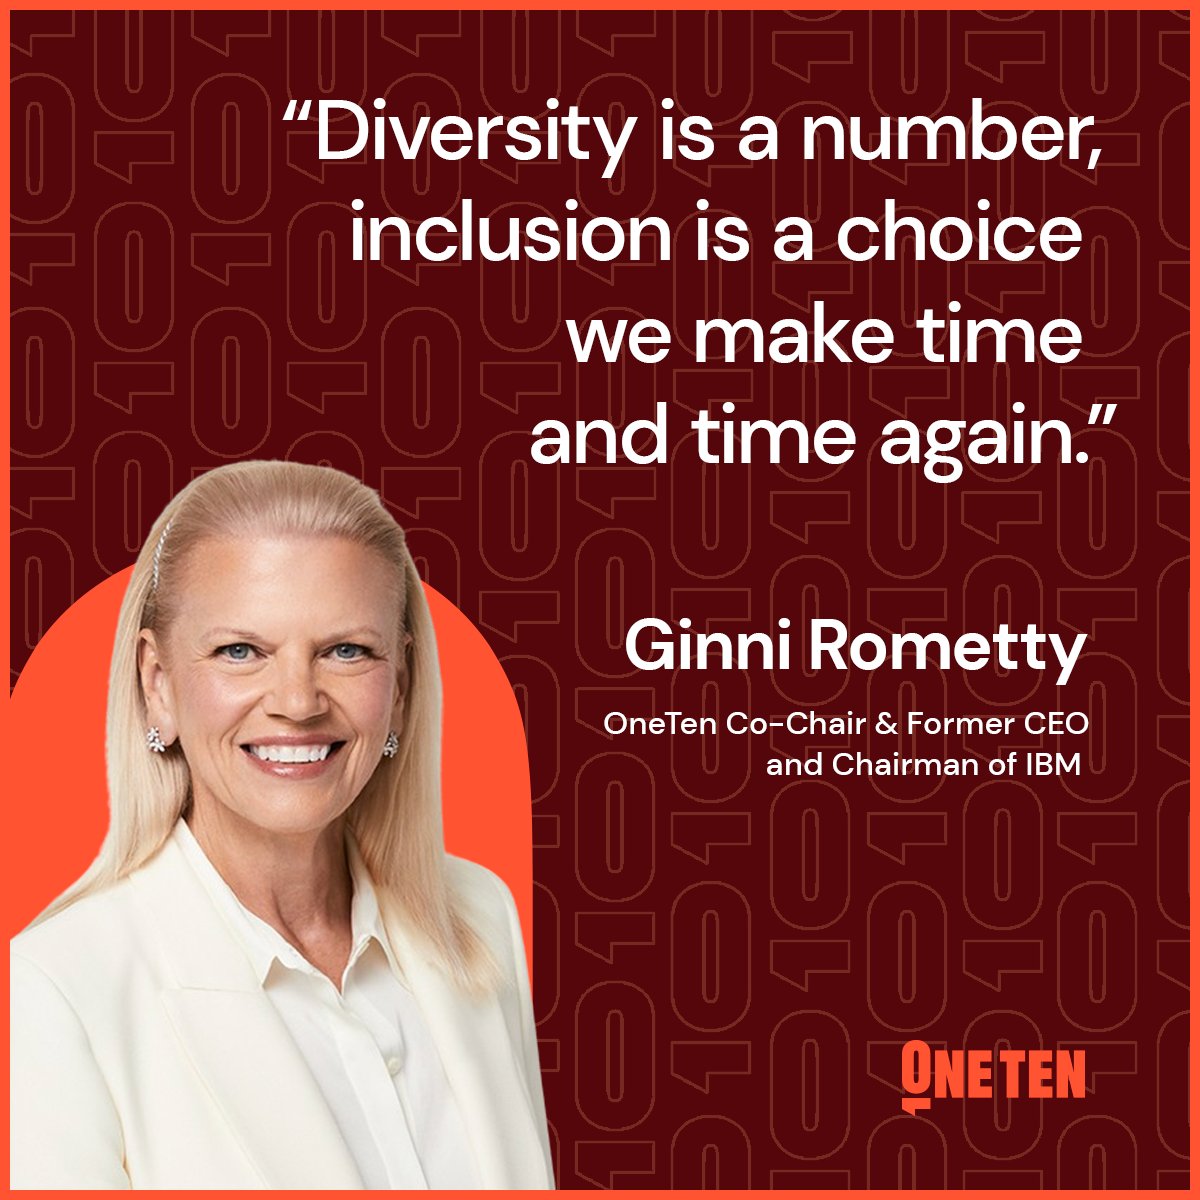 This #WomensHistoryMonth, we're honoring our Co-Chair and Former CEO and Chairman of @IBM, @GinniRometty, who has dedicated her life's work to supporting equal opportunities for advancement in the workplace. Thank you Ginni for inspiring Talent everywhere!